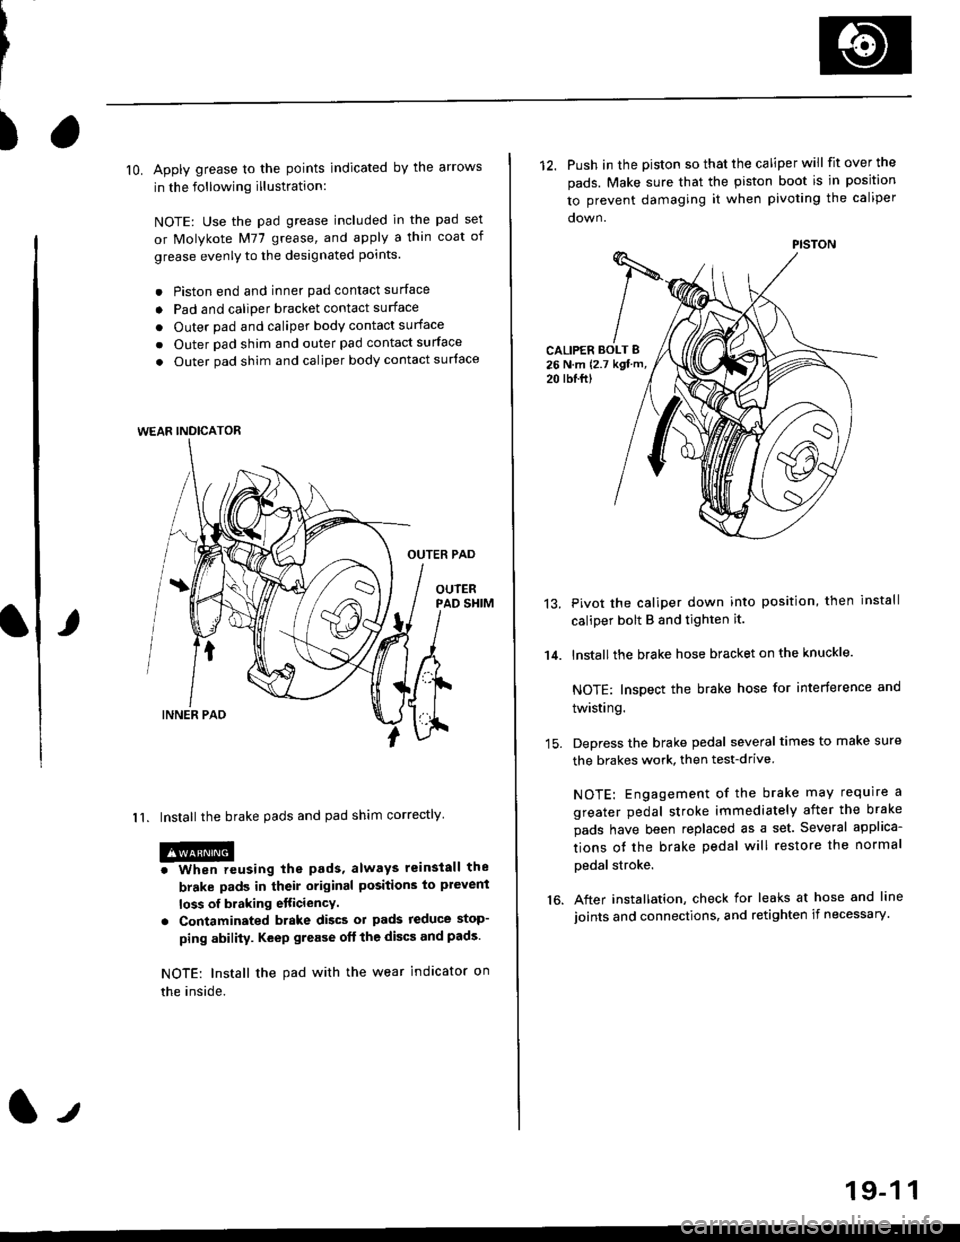 HONDA CIVIC 2000 6.G Workshop Manual )
lO. Apply grease to the points indicated by the arrows
in the following illustration:
NOTE: Use the pad grease included in the pad set
or Molykote M77 grease, and apply a thin coat of
grease evenly 